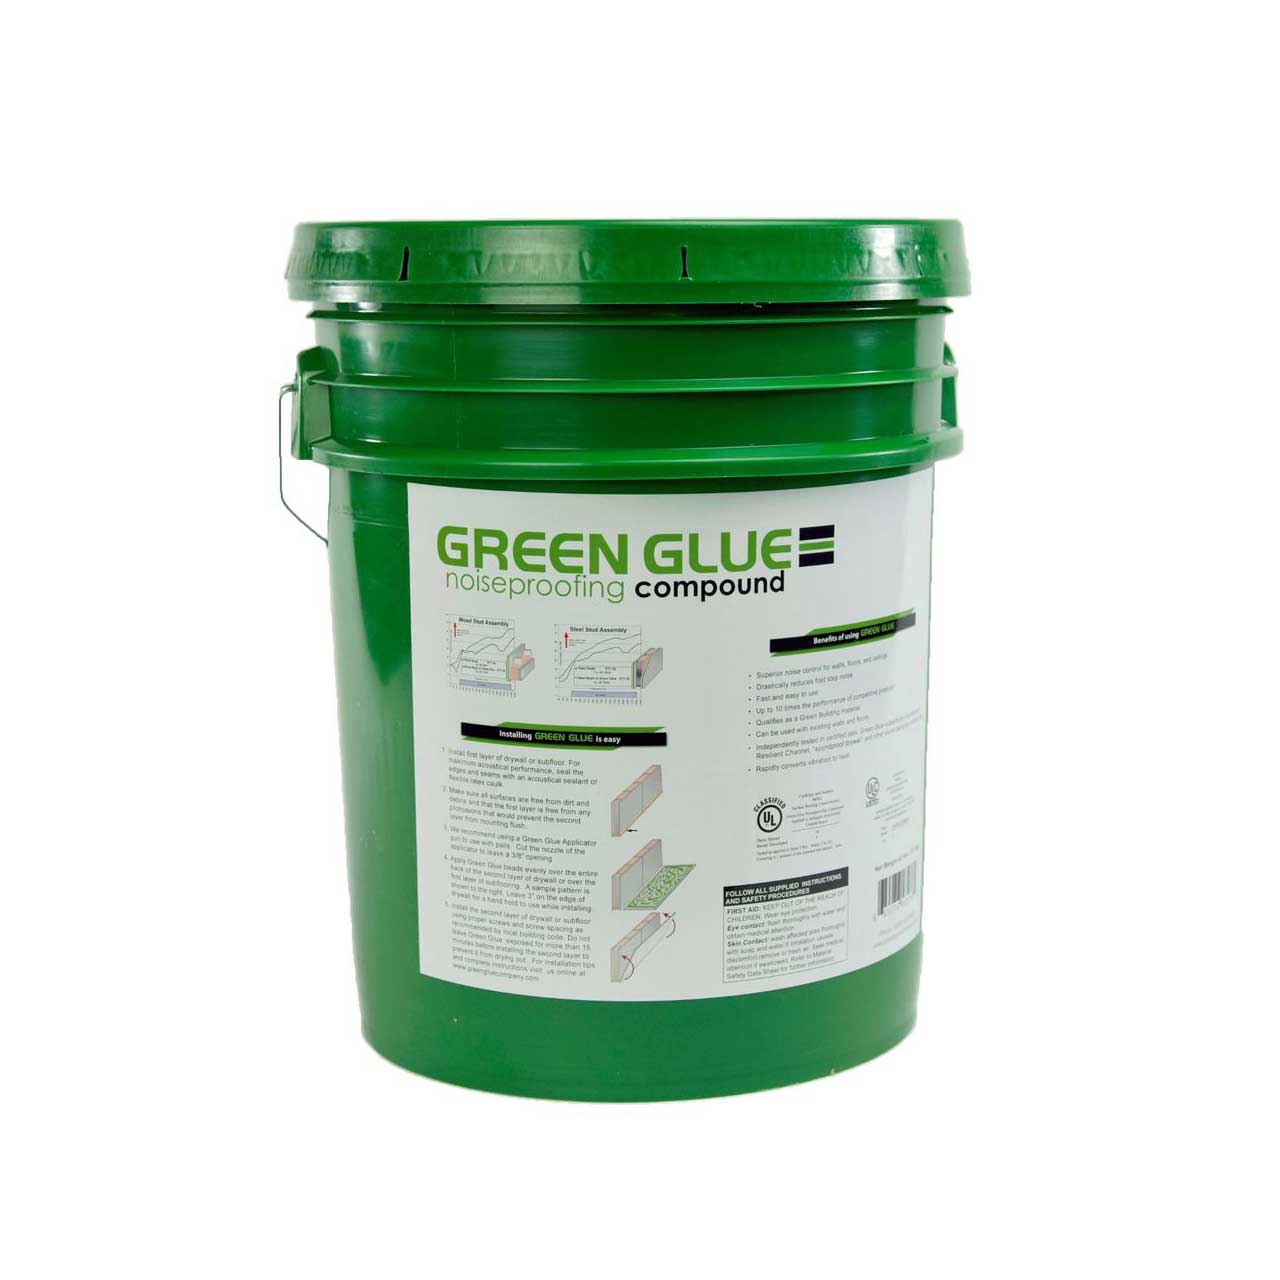 Green Glue Viscoelastic Damping Compound